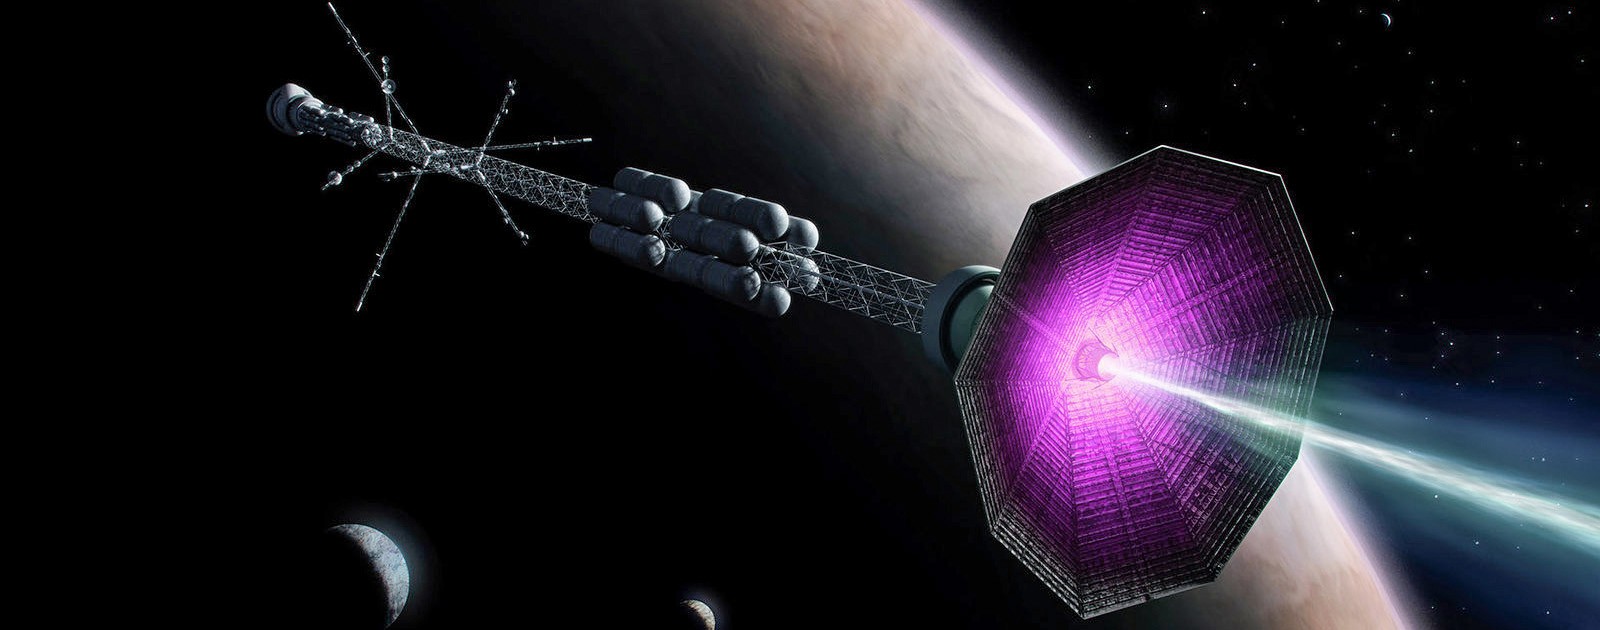 Space propulsion | Have fusion, will travel